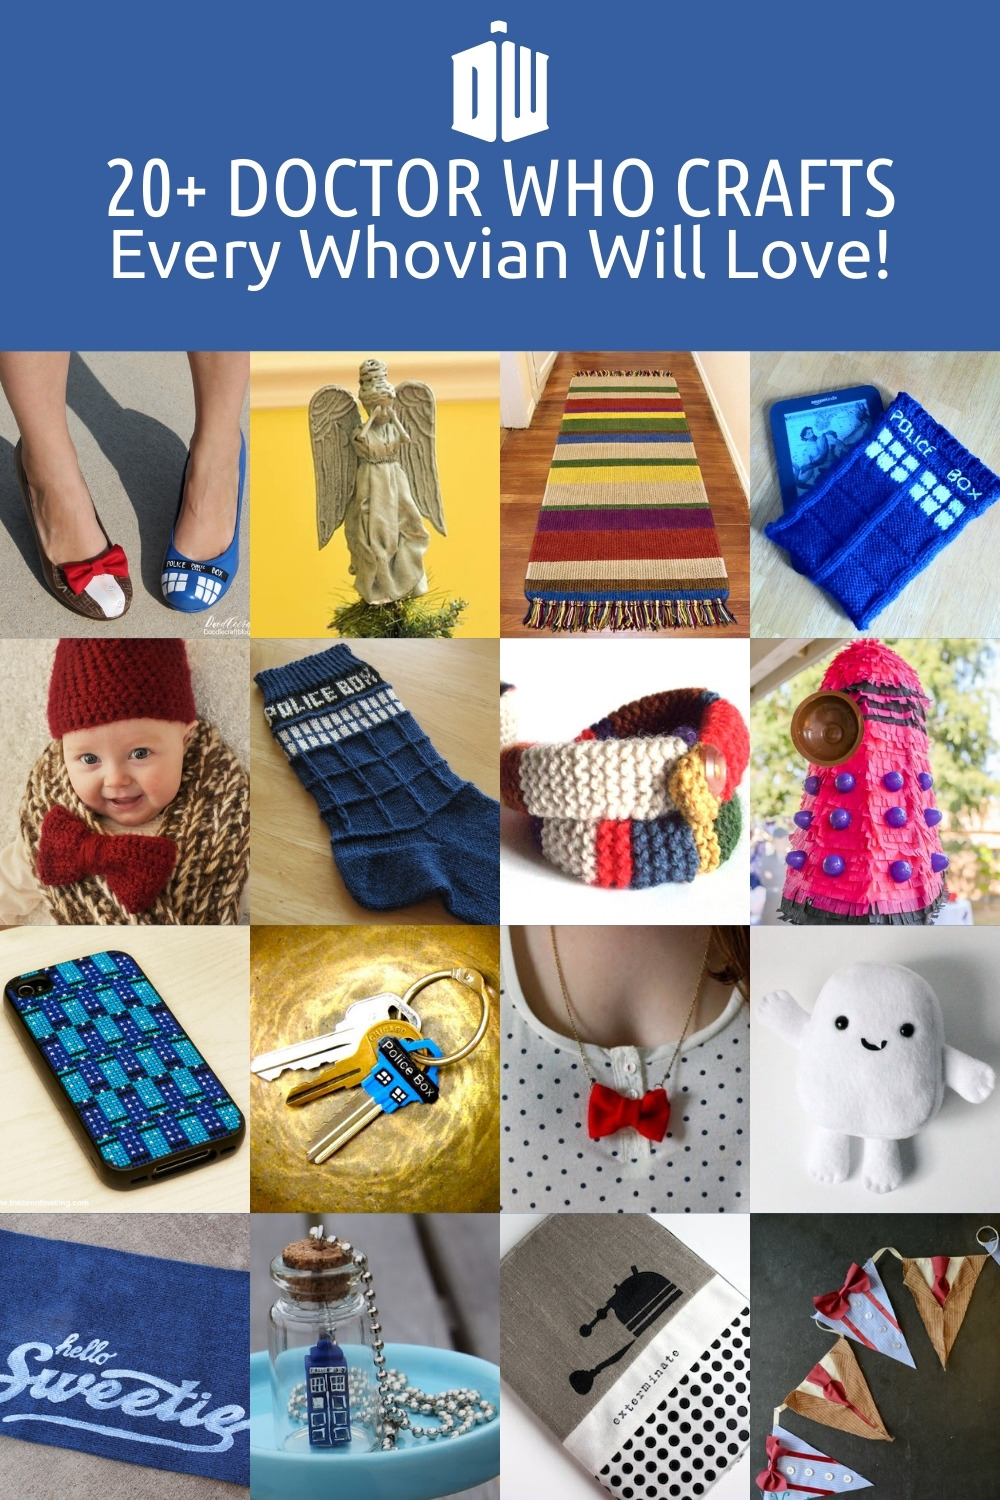 Doctor Who Crafts - 20+ Gifts Whovians Will Love